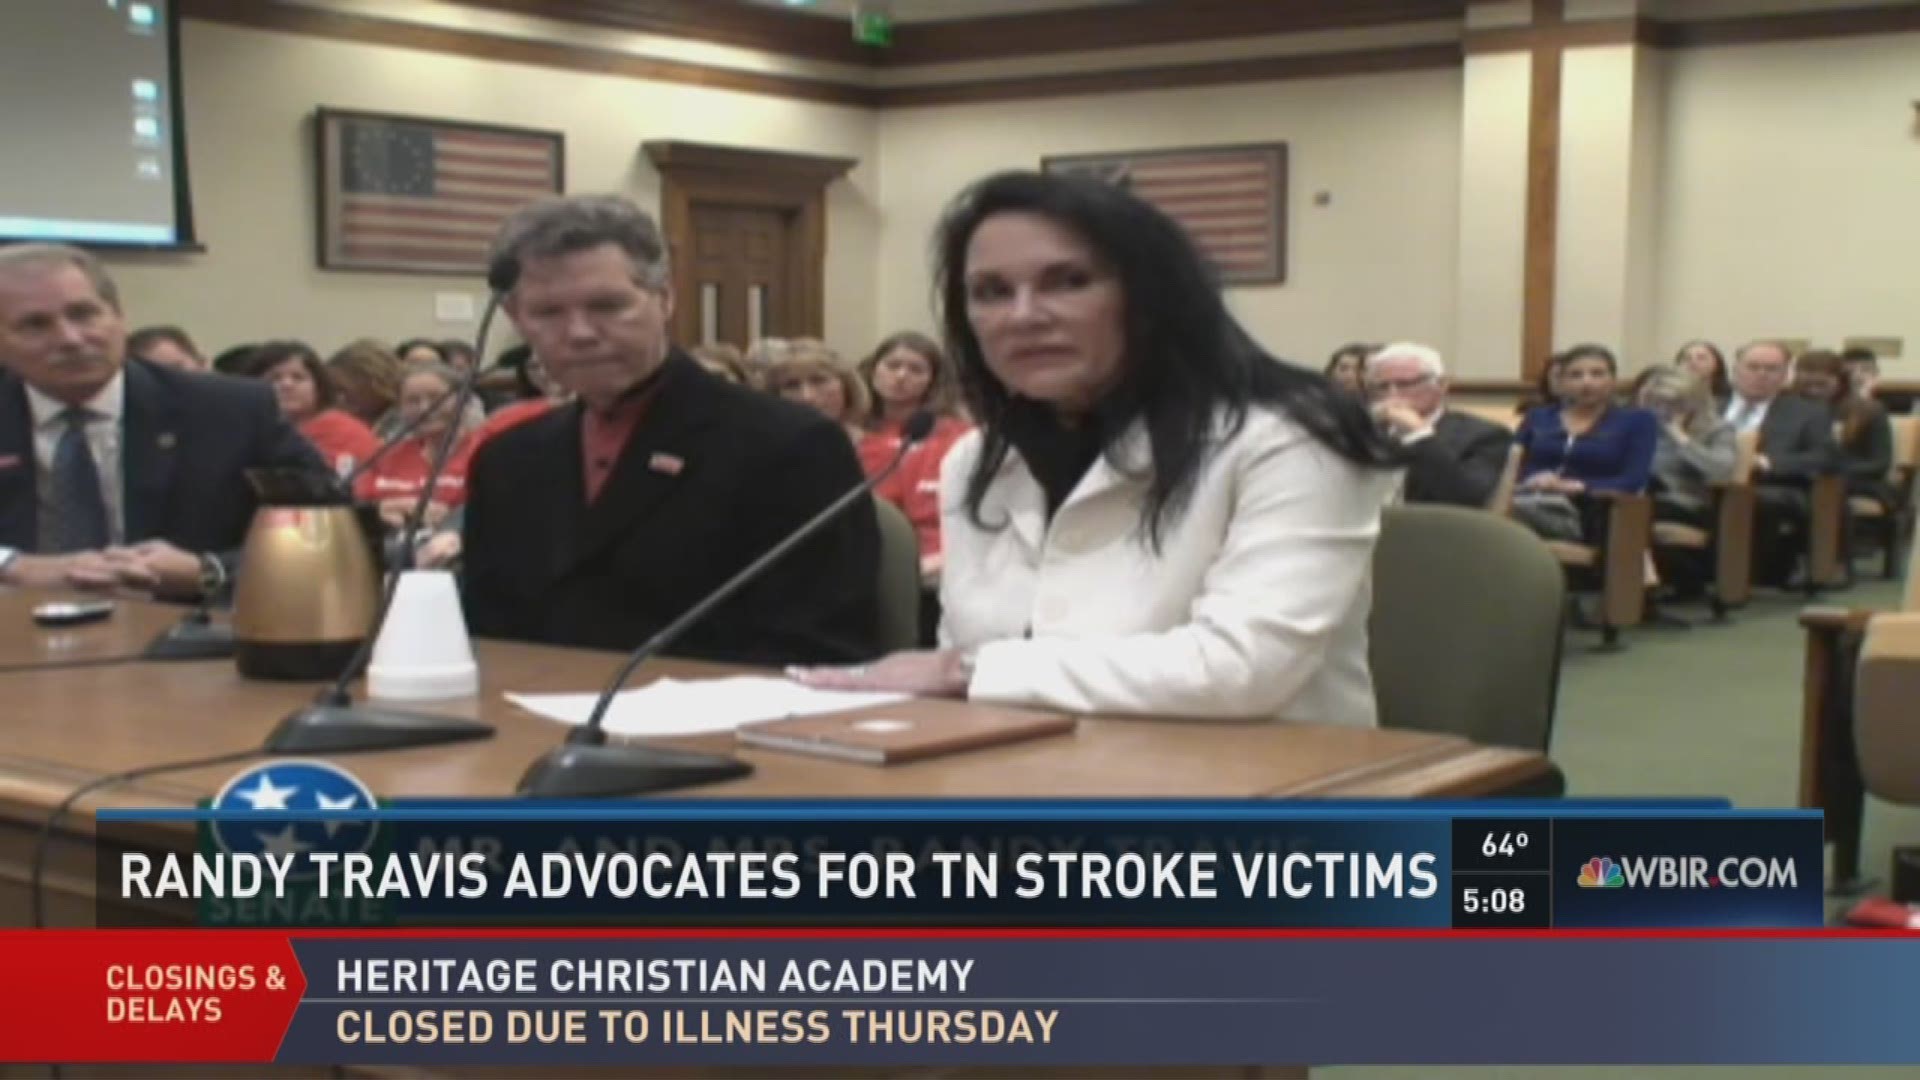 Travis had a major stroke in 2013 and today his wife advocated for stroke victims